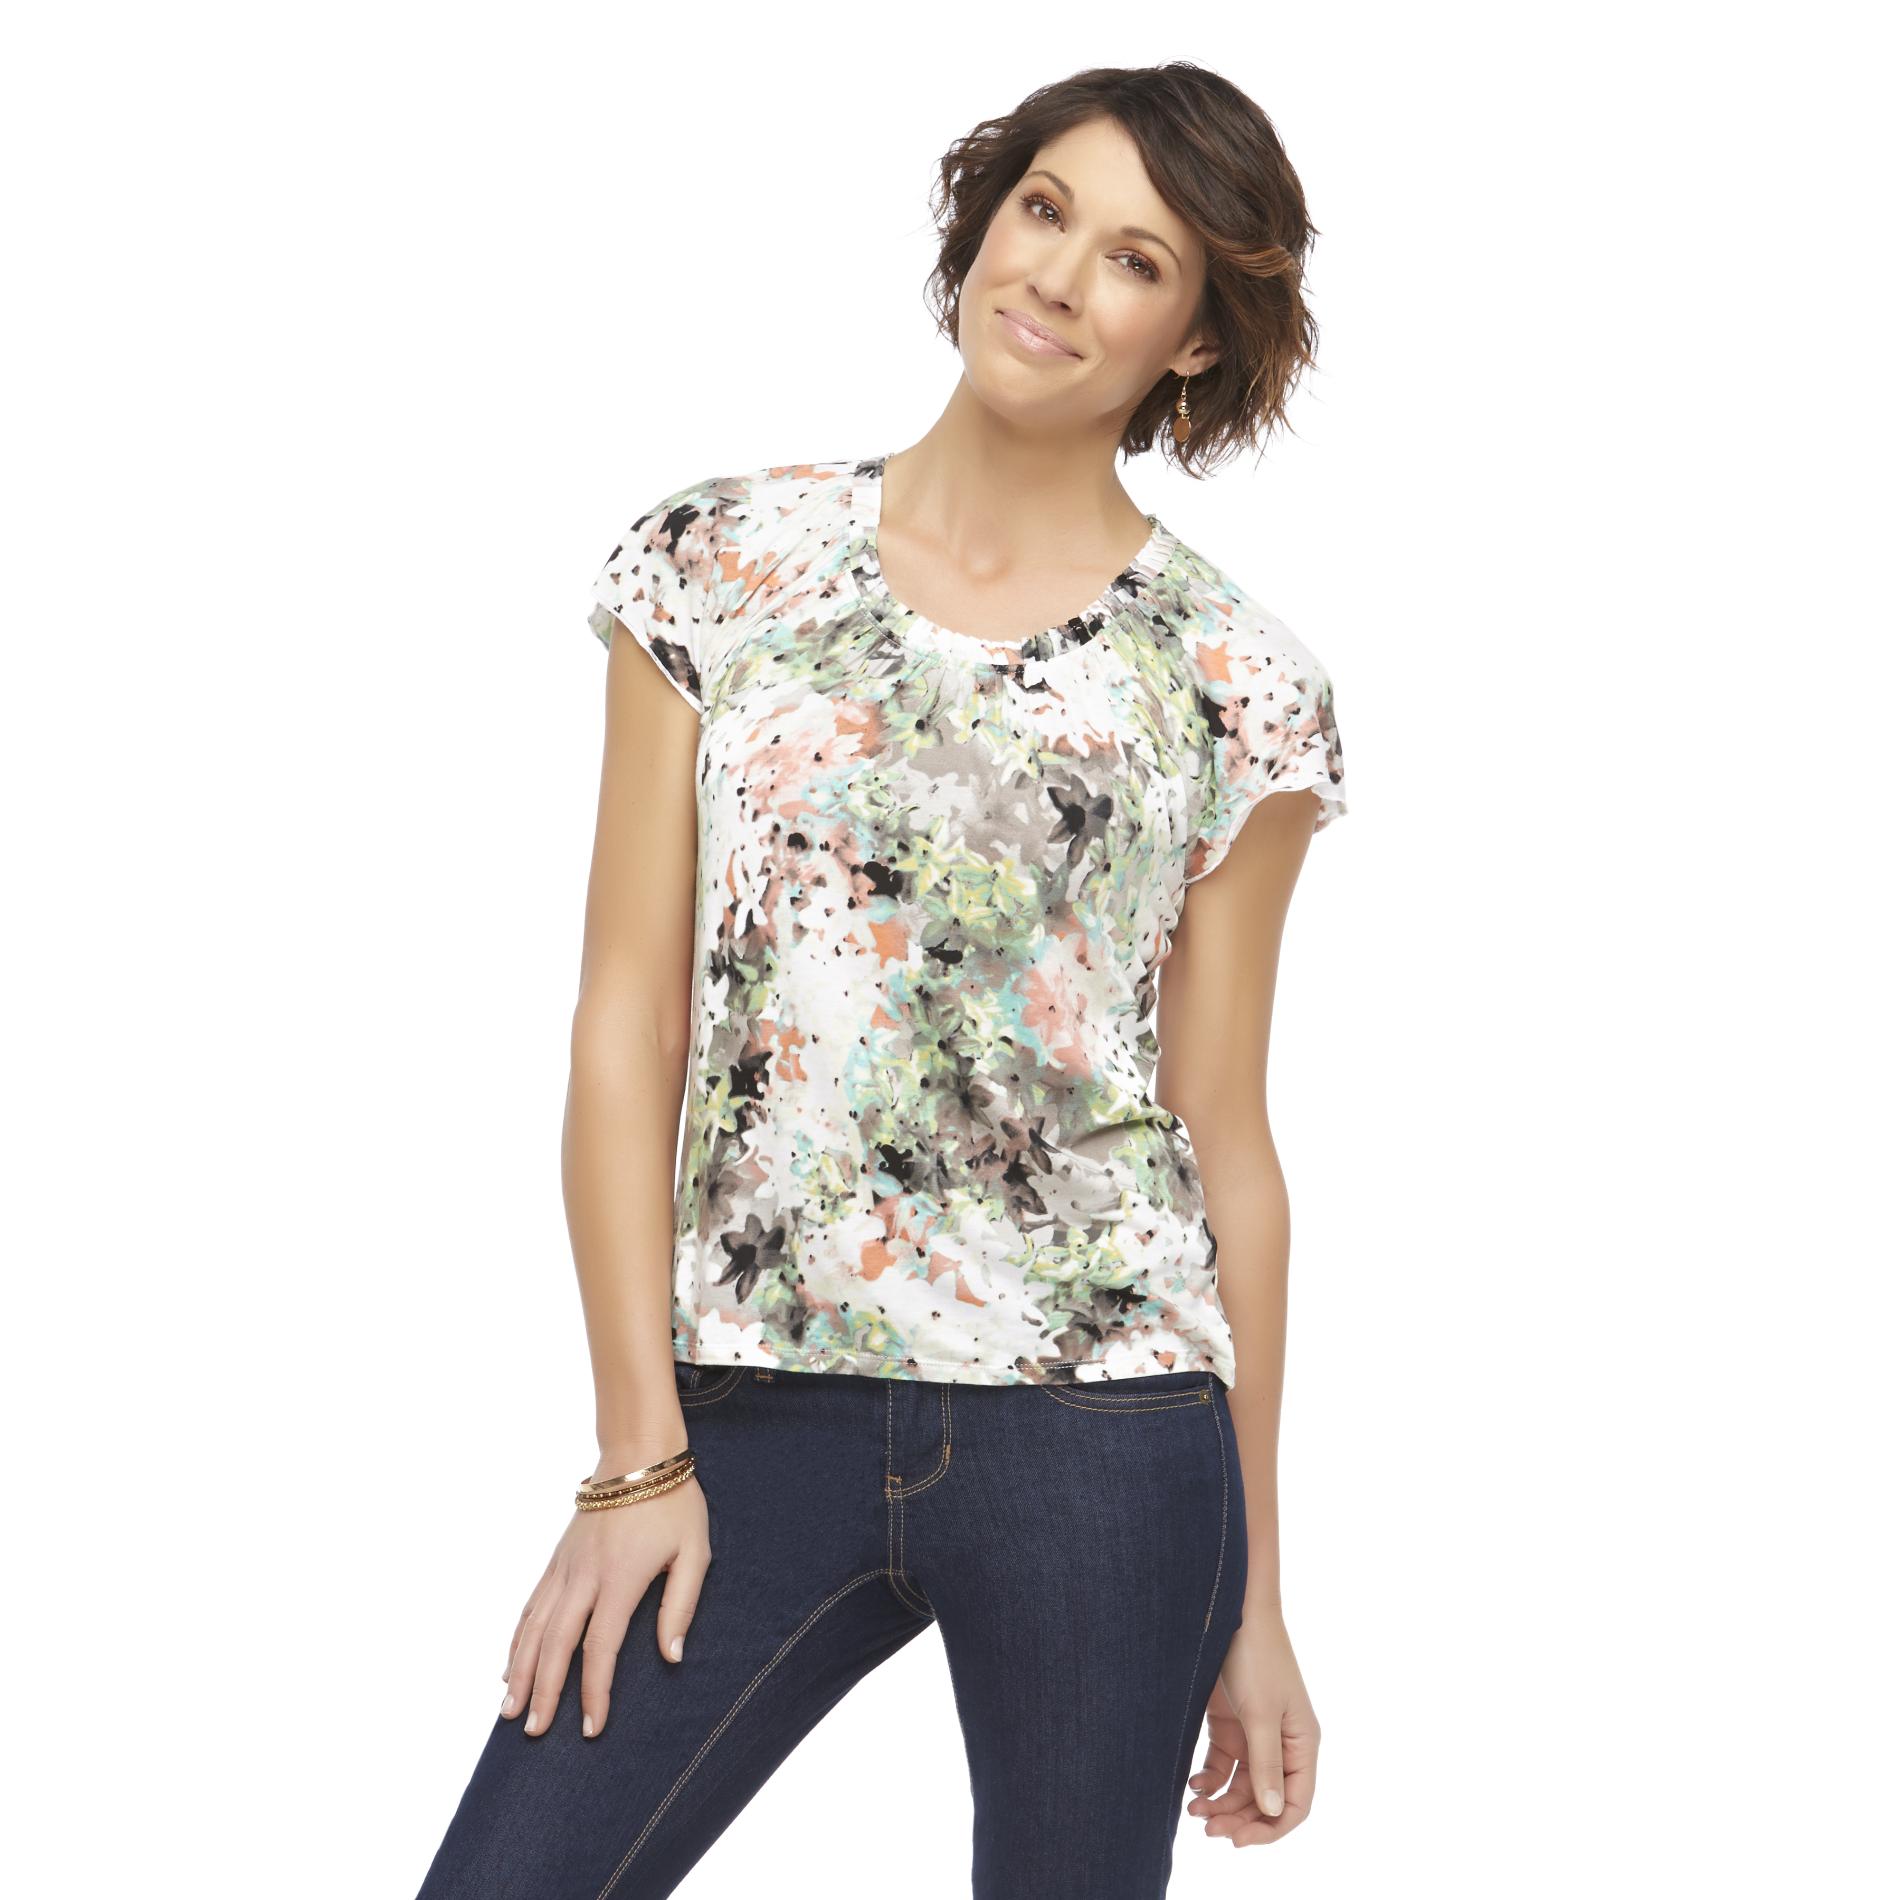 Jaclyn Smith Women's Pleated Top - Watercolor Floral Print